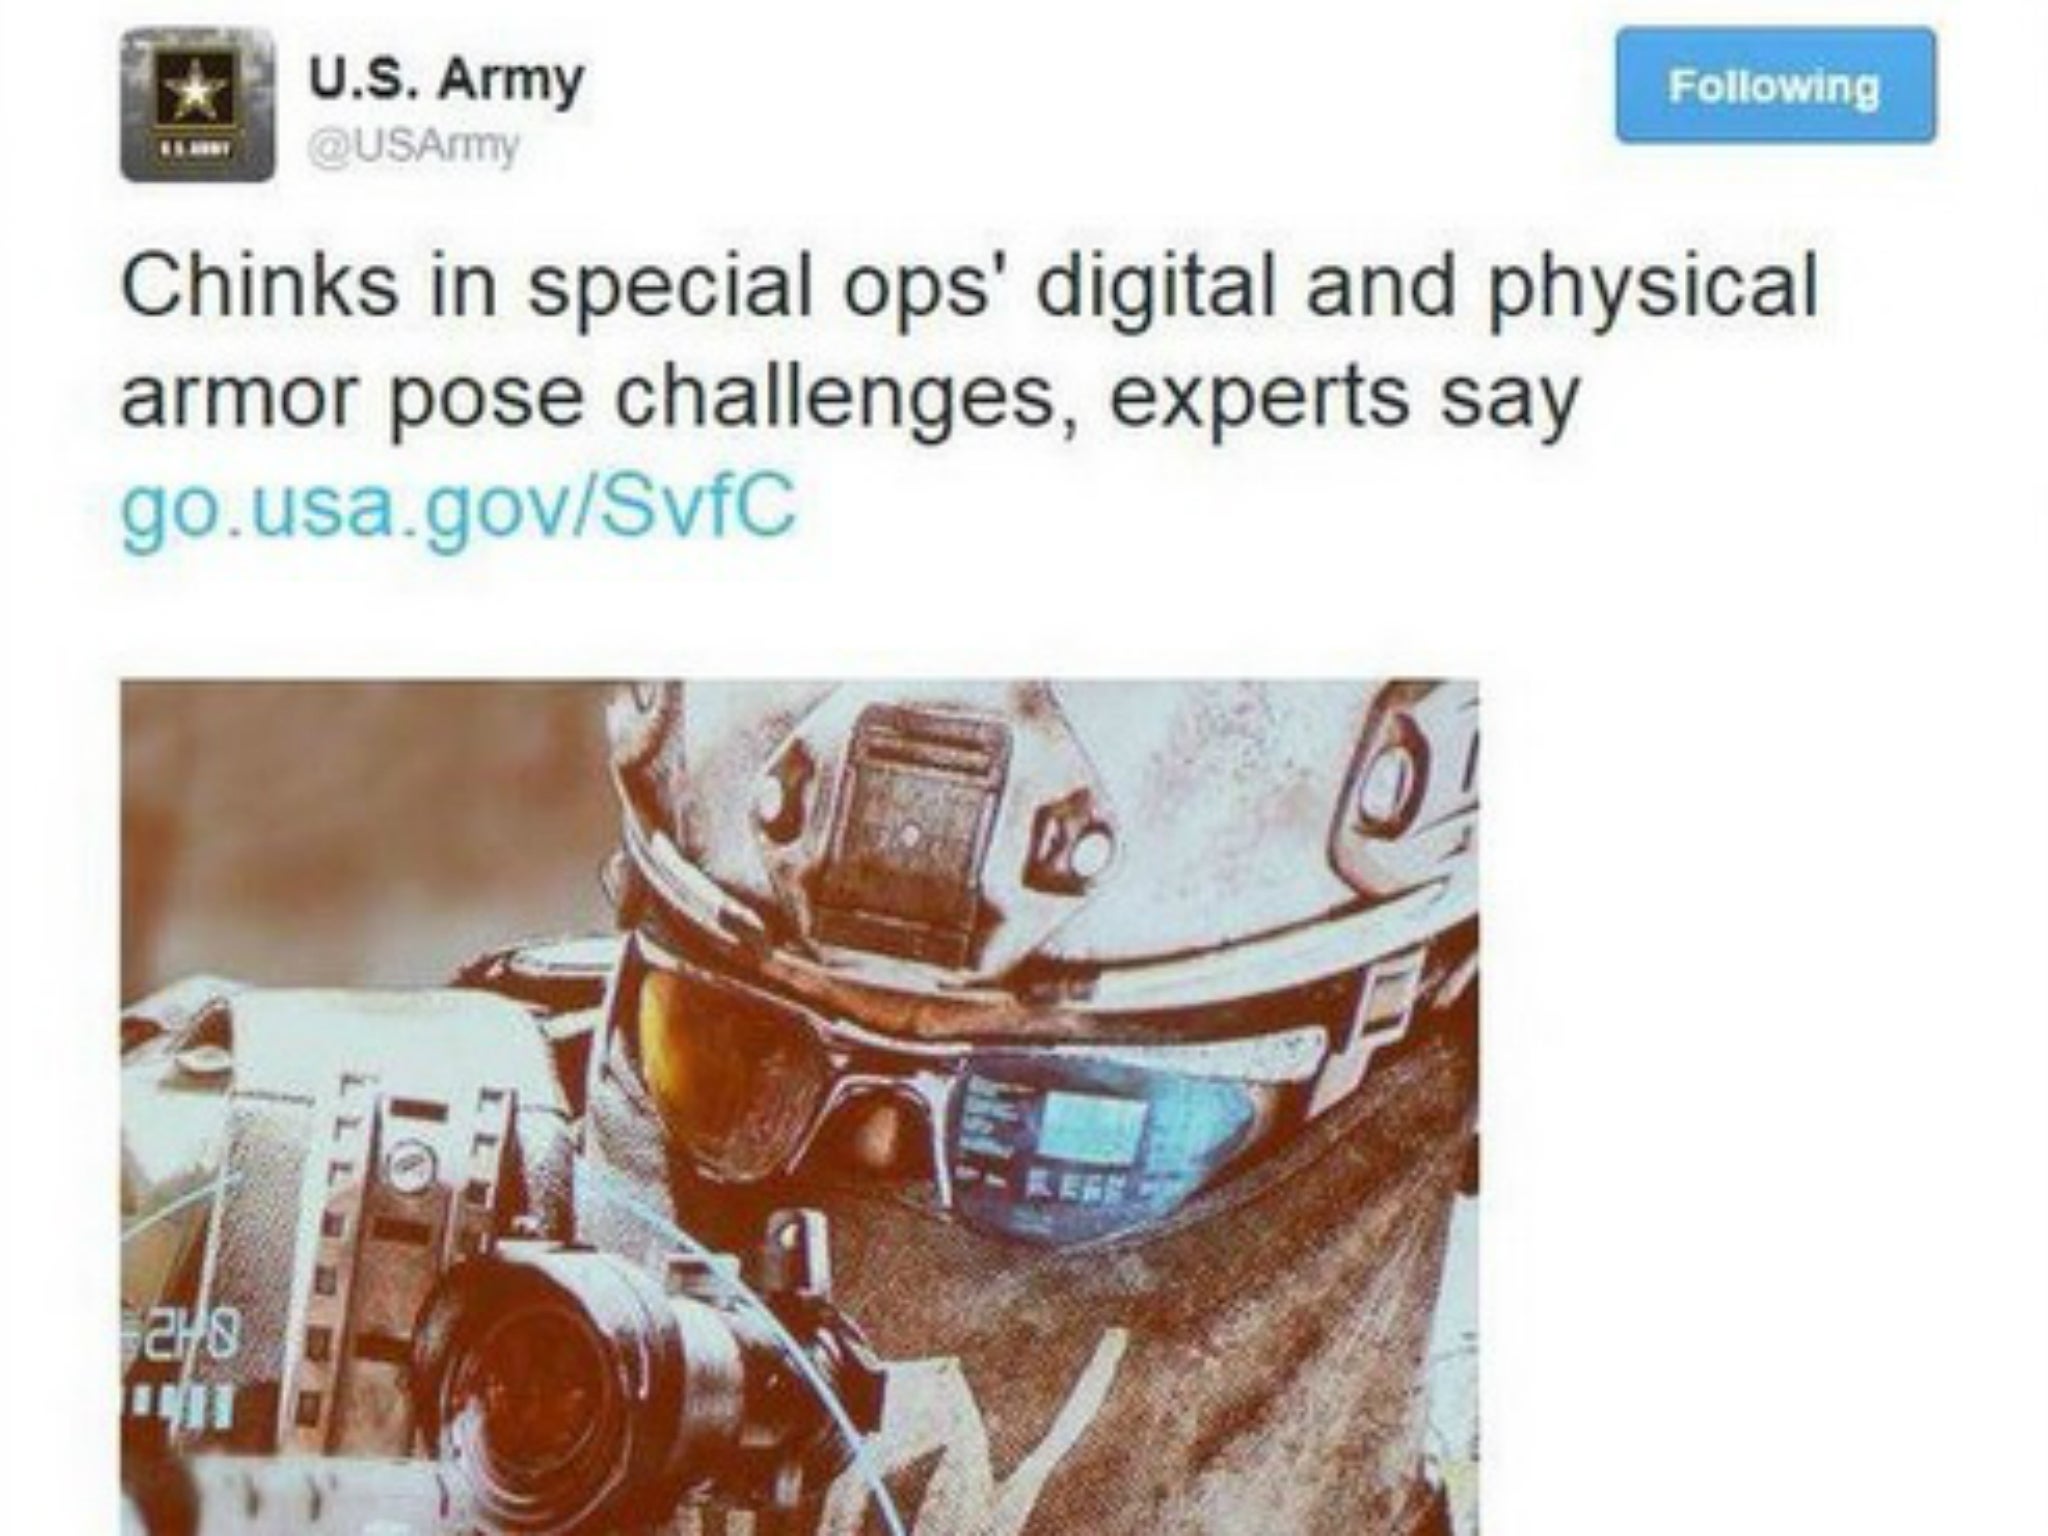 The US Army tweet which provoked the accusations has since been deleted